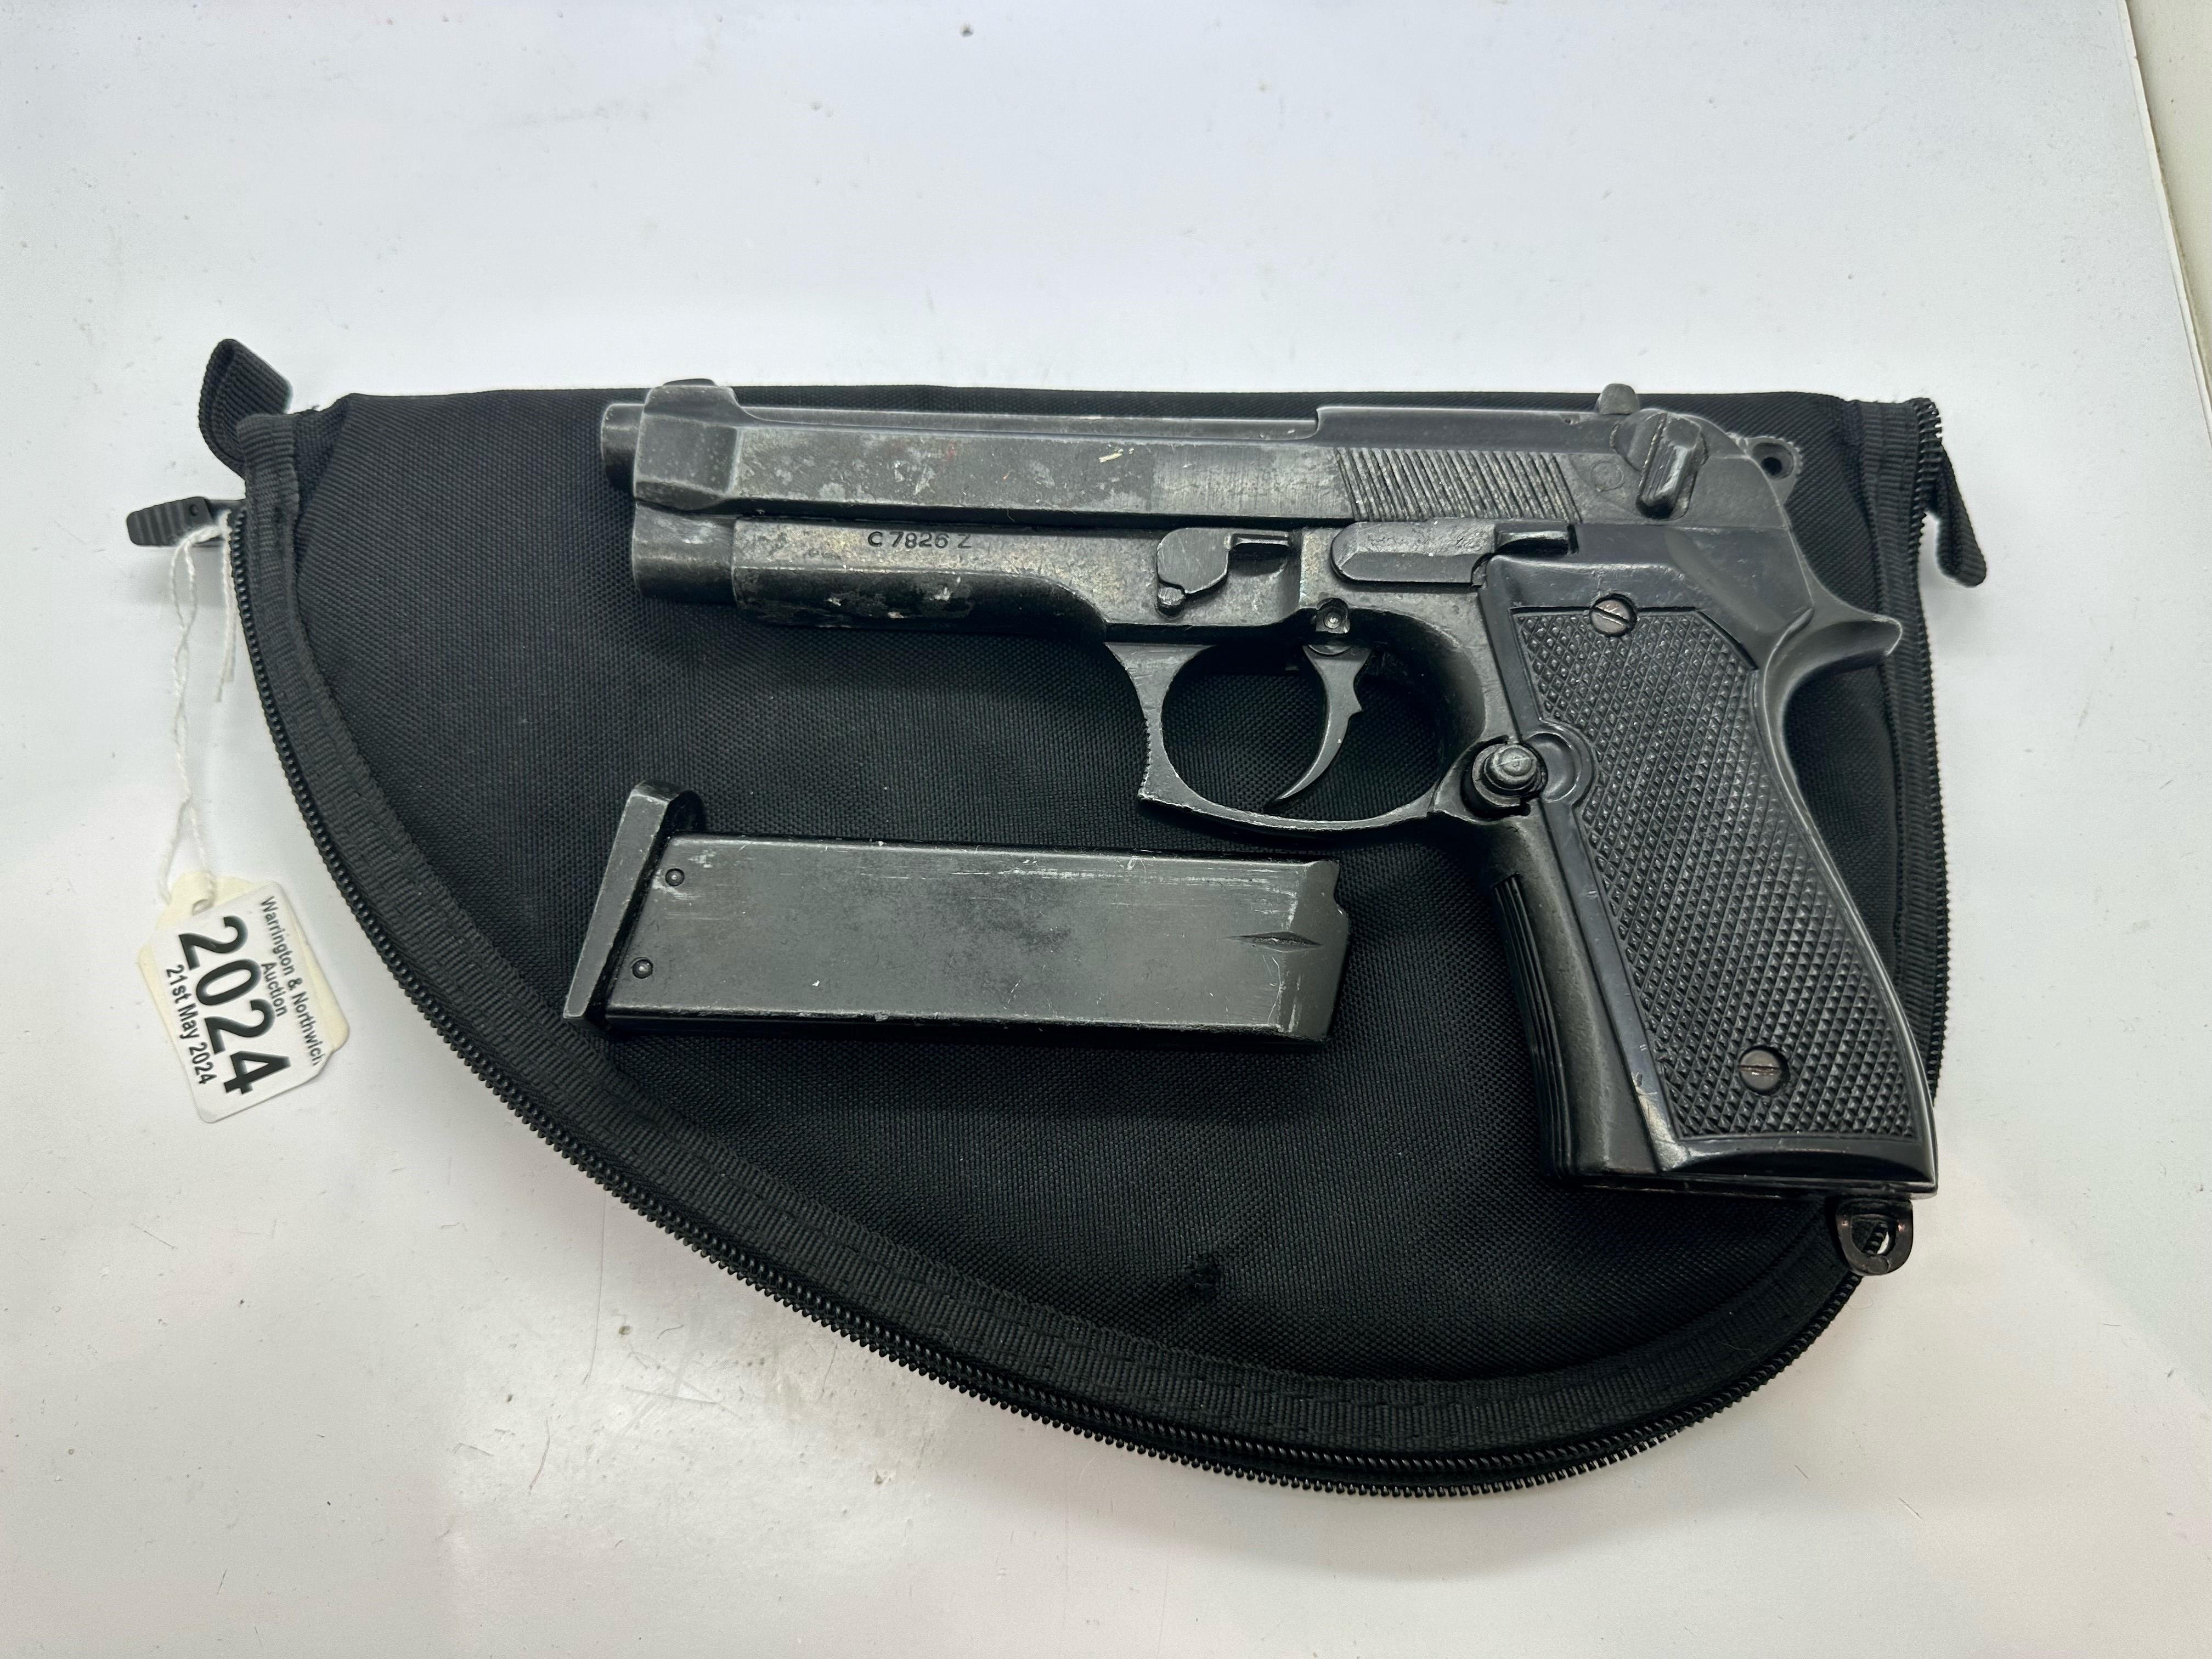 M92 Beretta 9mm handgun, military model replica, moving parts, in carry case. UK P&P Group 2 (£20+ - Image 3 of 3